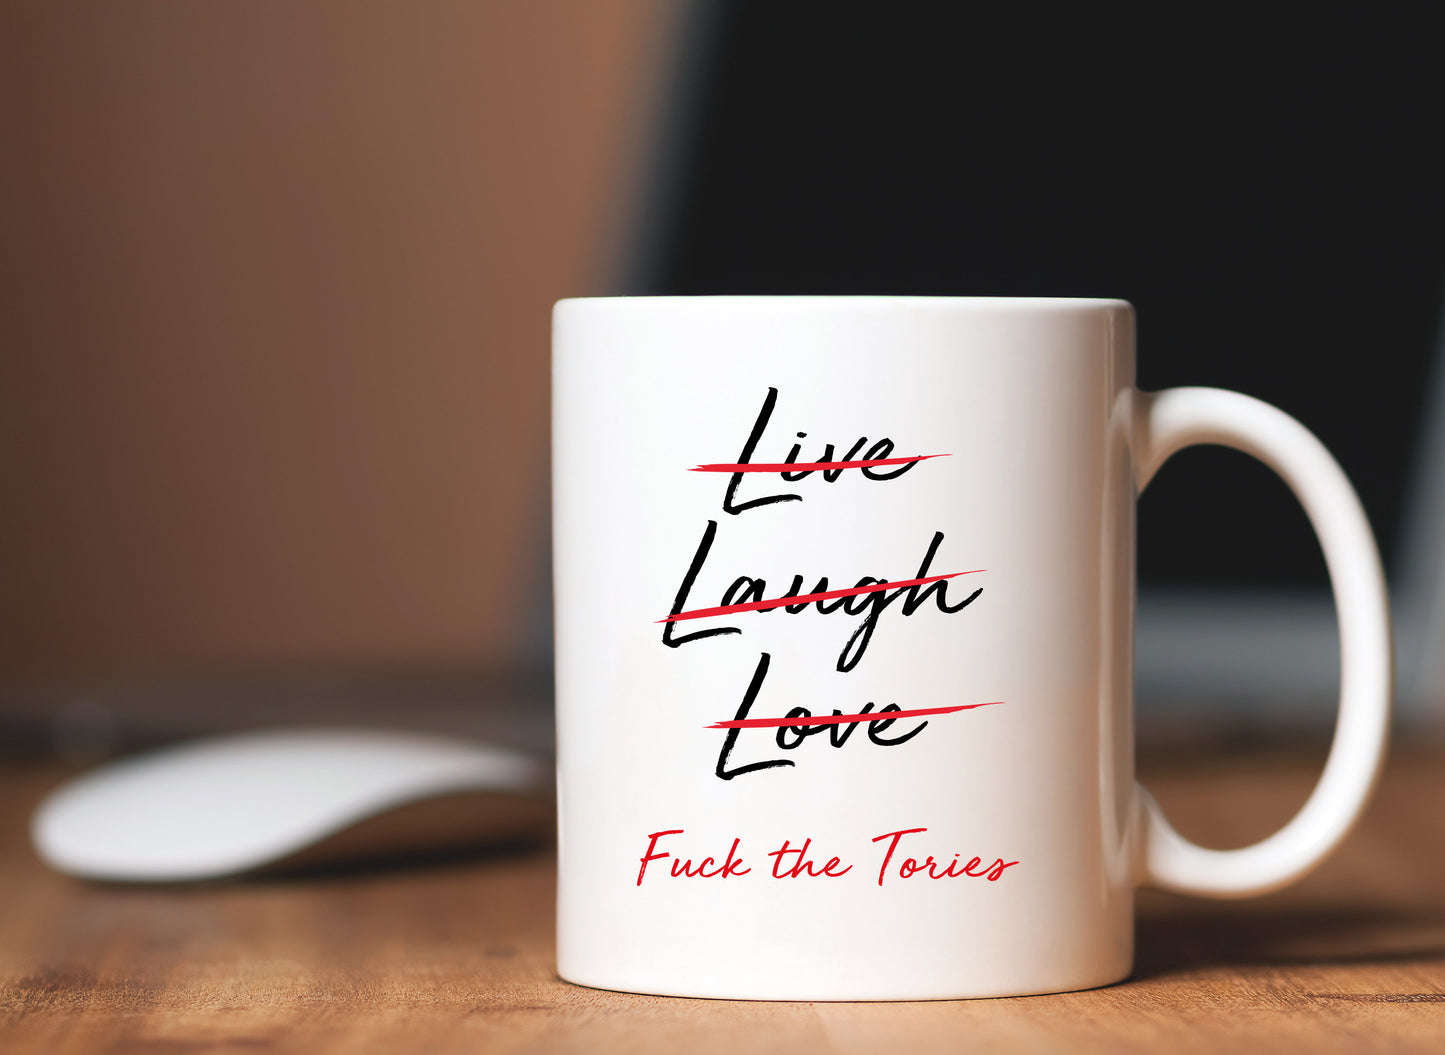 Live Laugh Love F*ck the Tories Mug - Funny Rude Offensive Coffee Cup